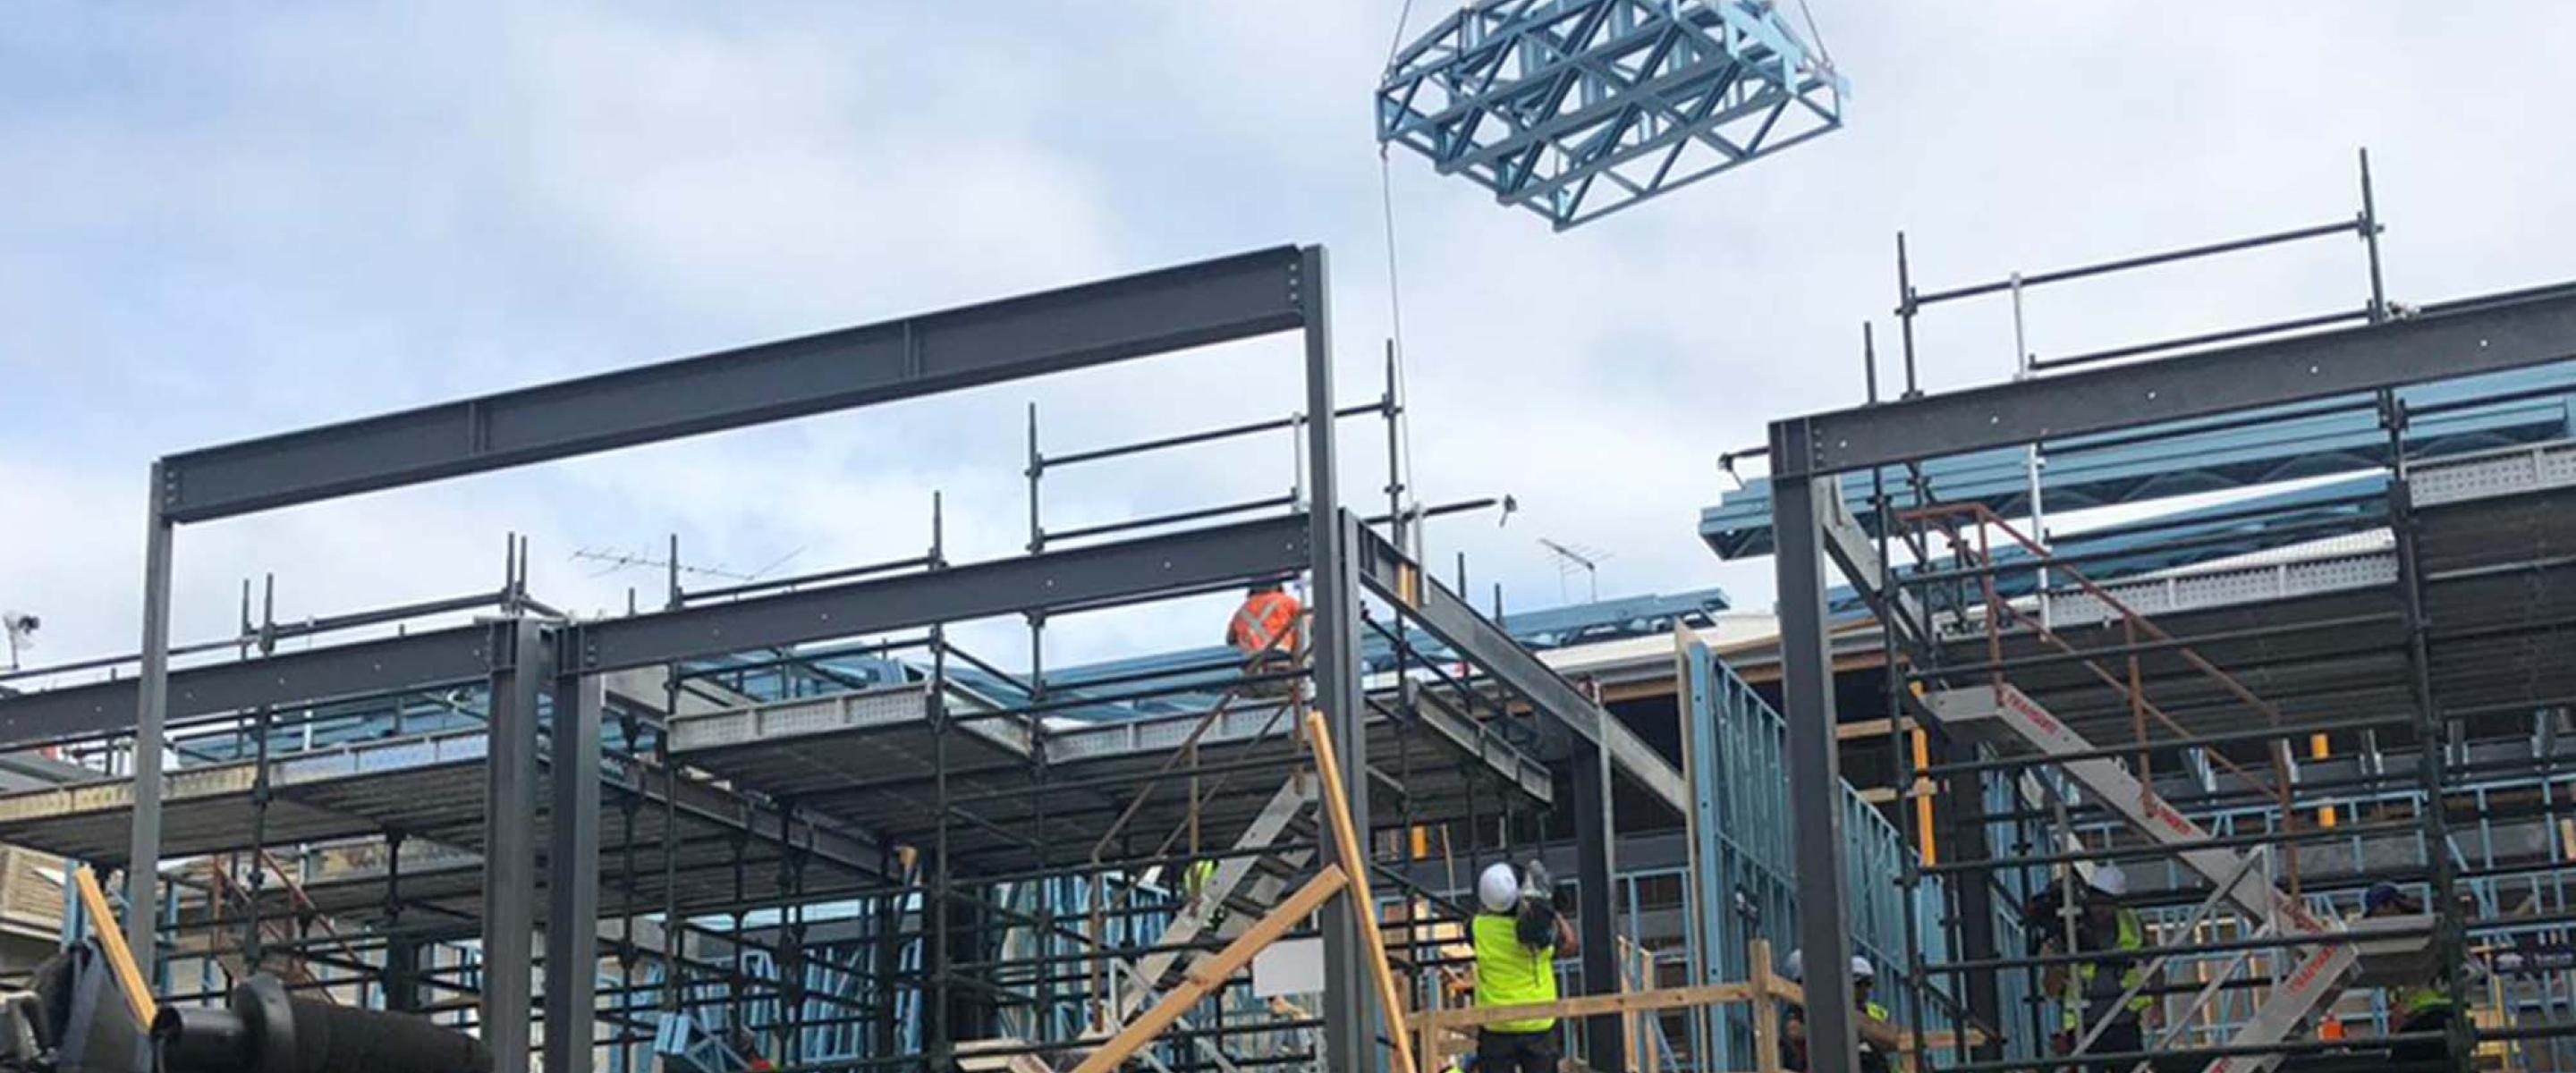 Each skylight module frame made from TRUECORE® steel was craned into position